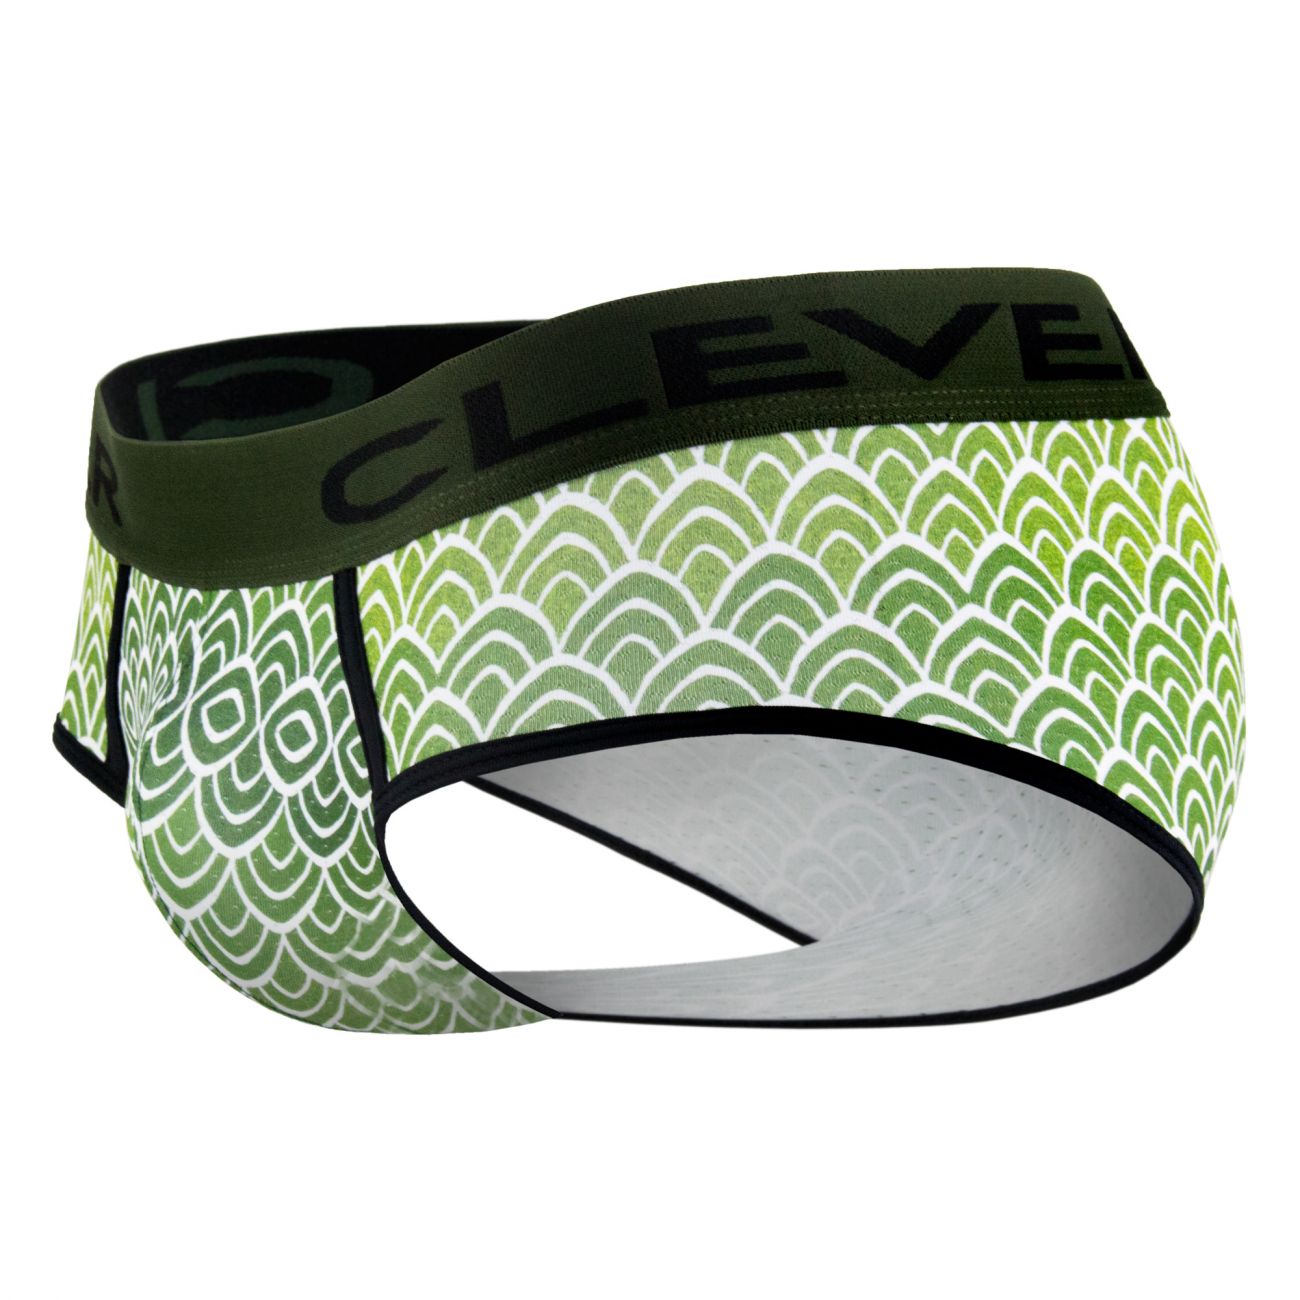 Clever 5346 Mask Piping Briefs Green